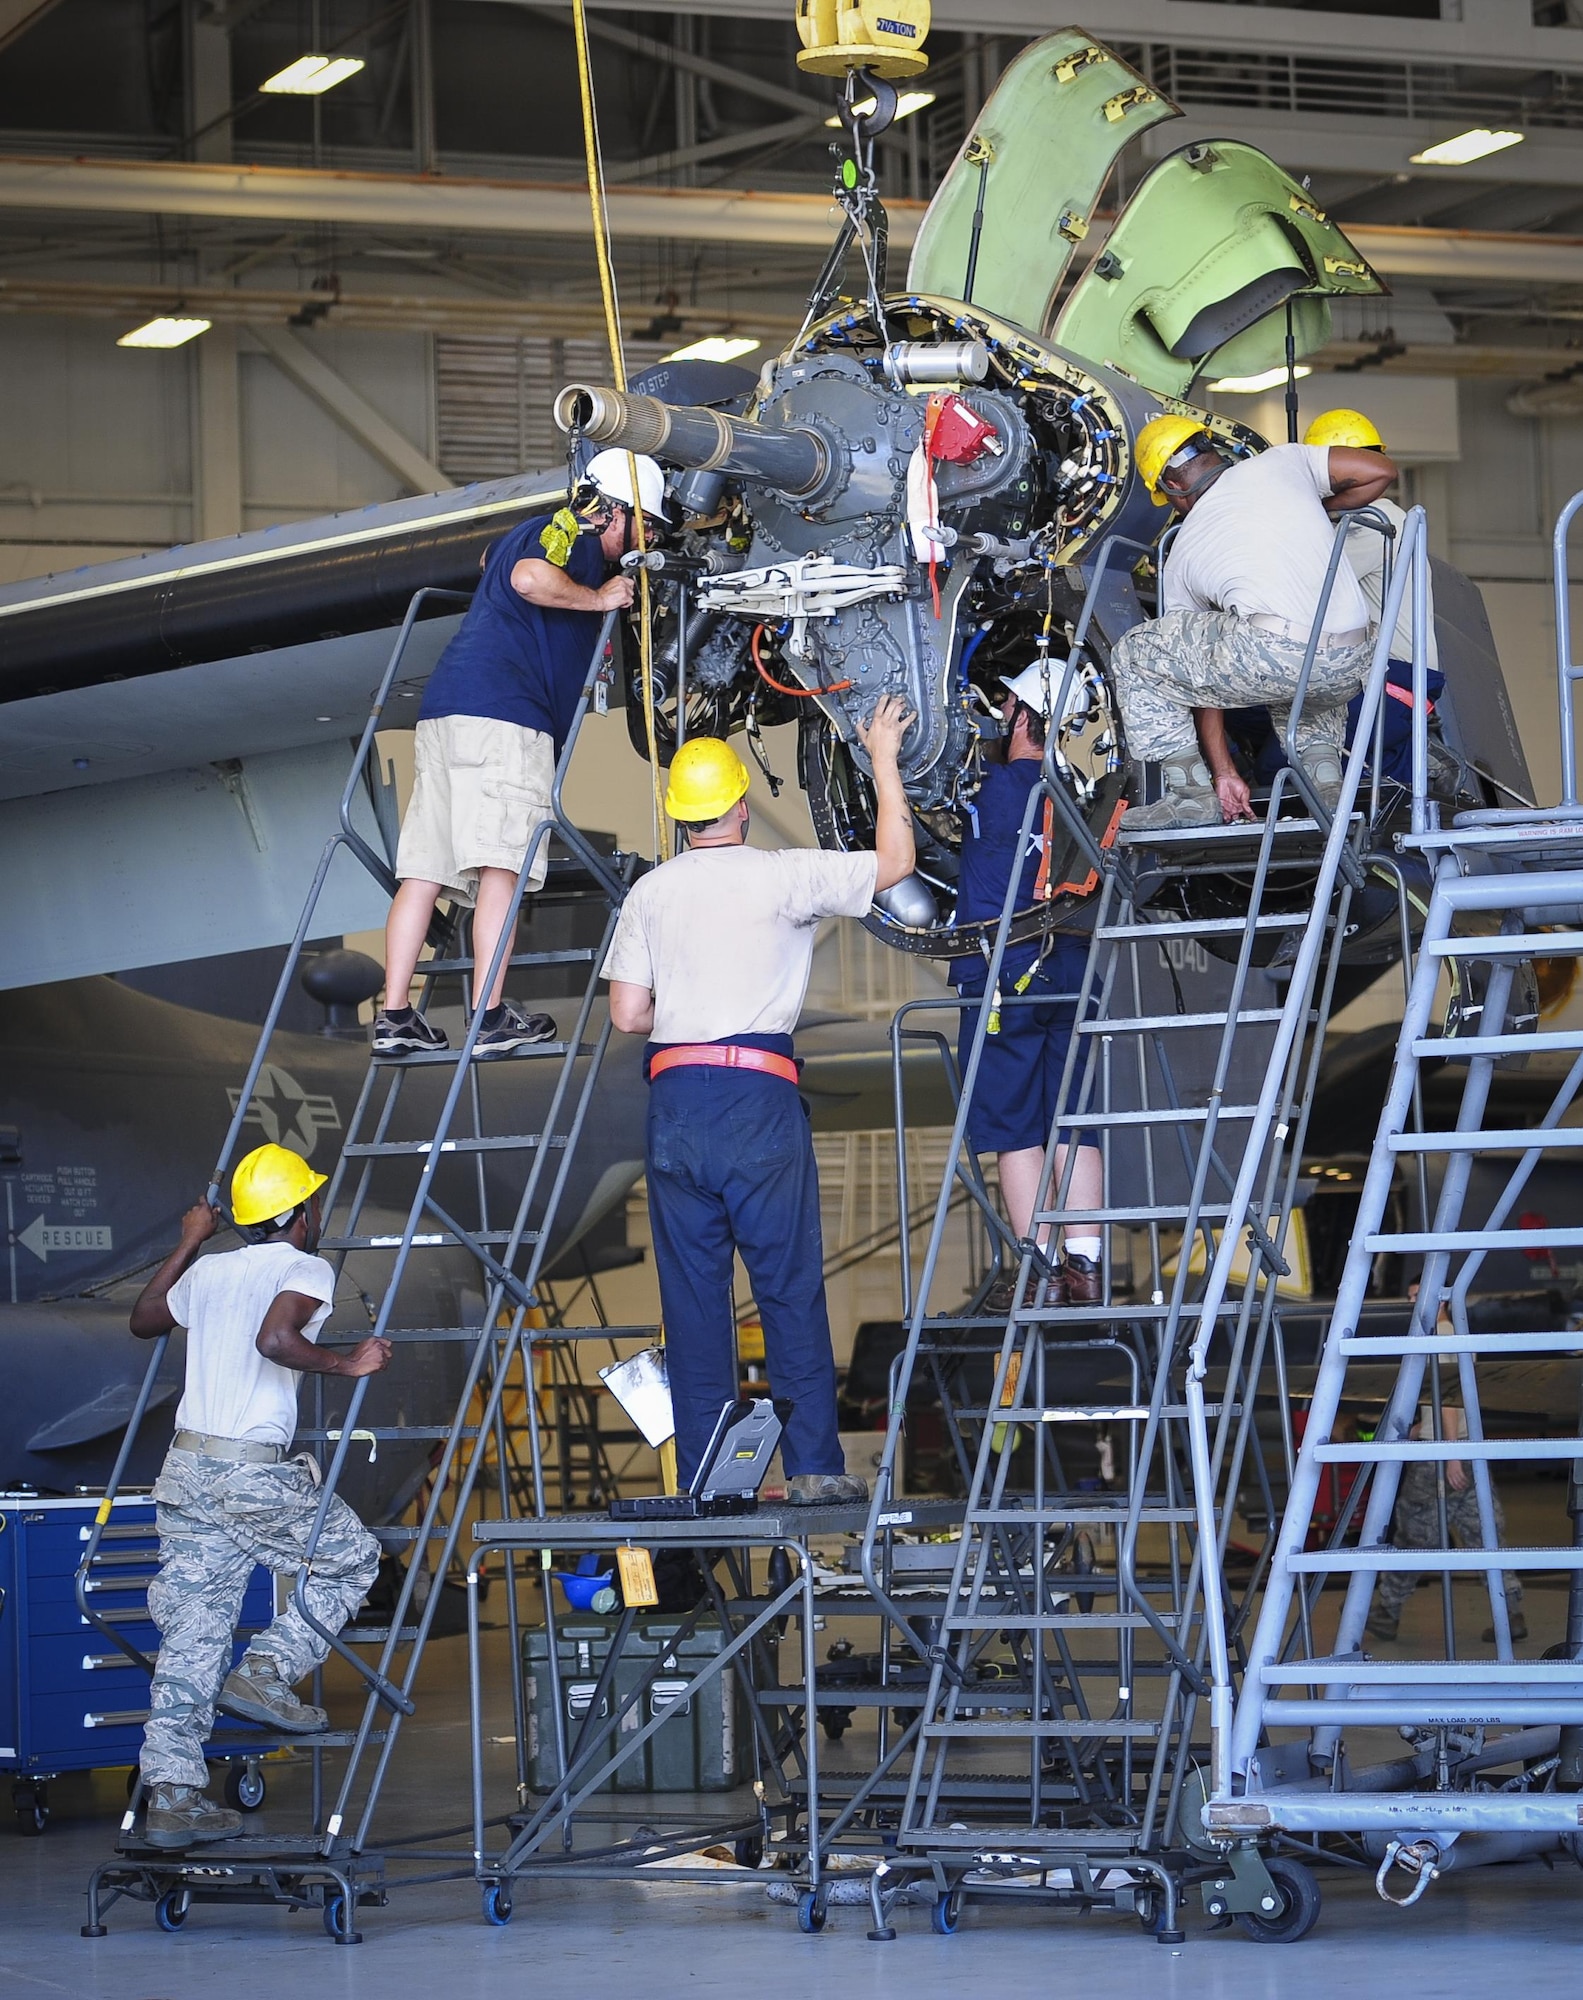 Airmen with the 801st Special Operations Aircraft Maintenance Squadron, perform maintenance on a CV-22B Osprey gear box at Hurlburt Field Fla., July 20, 2015. The 801st SOAMXS’s mission is to perform all equipment maintenance in support of worldwide special operations missions in response to national command authority taskings for the CV-22B Osprey and the MC-130H Talon II. Maintenance includes aircraft servicing, phase inspections, troubleshooting, repair, modifications and launch recovery for all aircraft. (U.S. Air Force photo/Senior Airman Meagan Schutter)